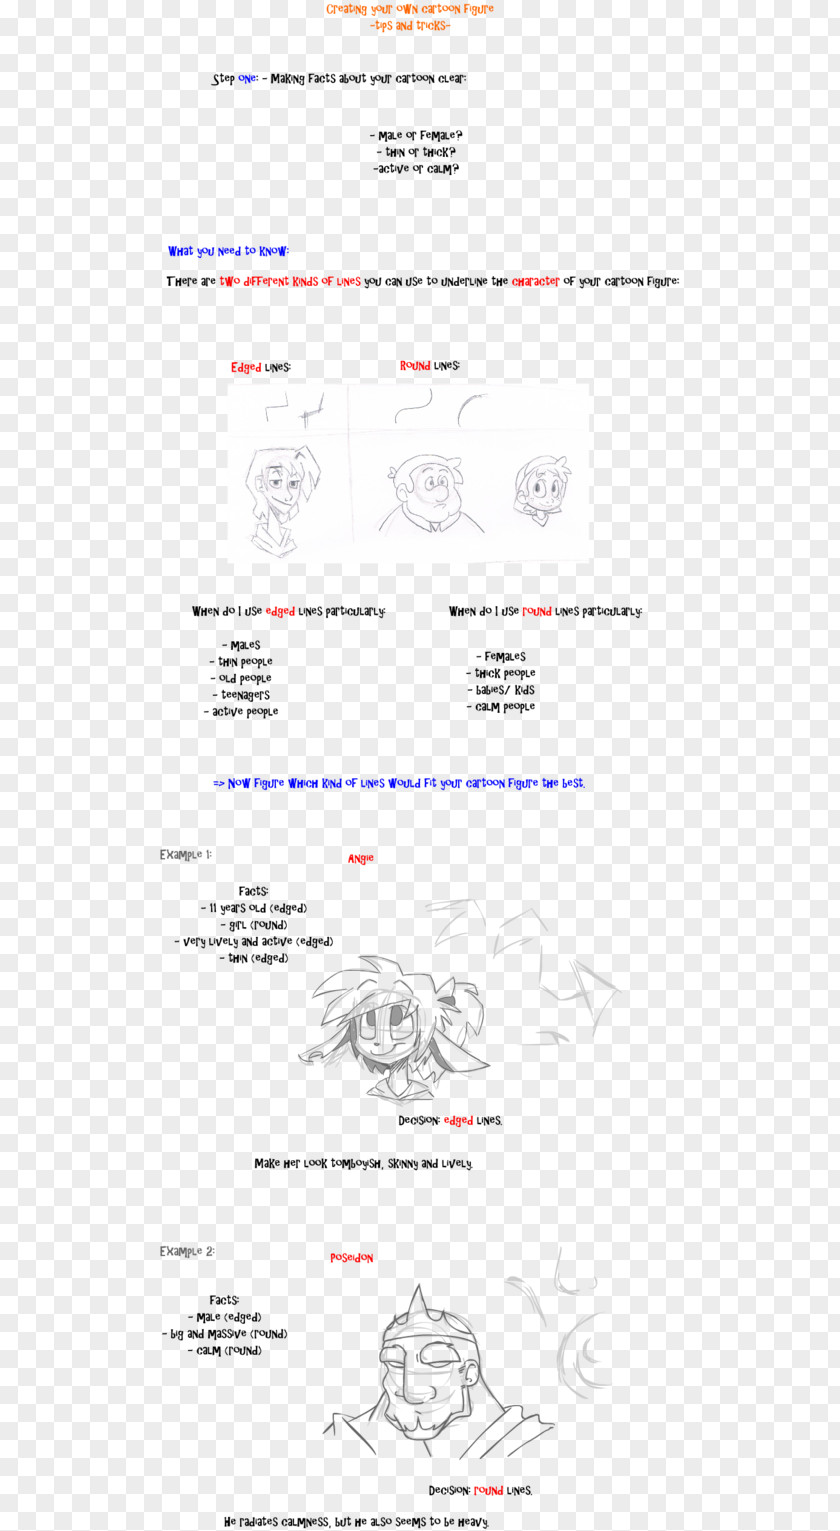 Design Document Line Point PNG